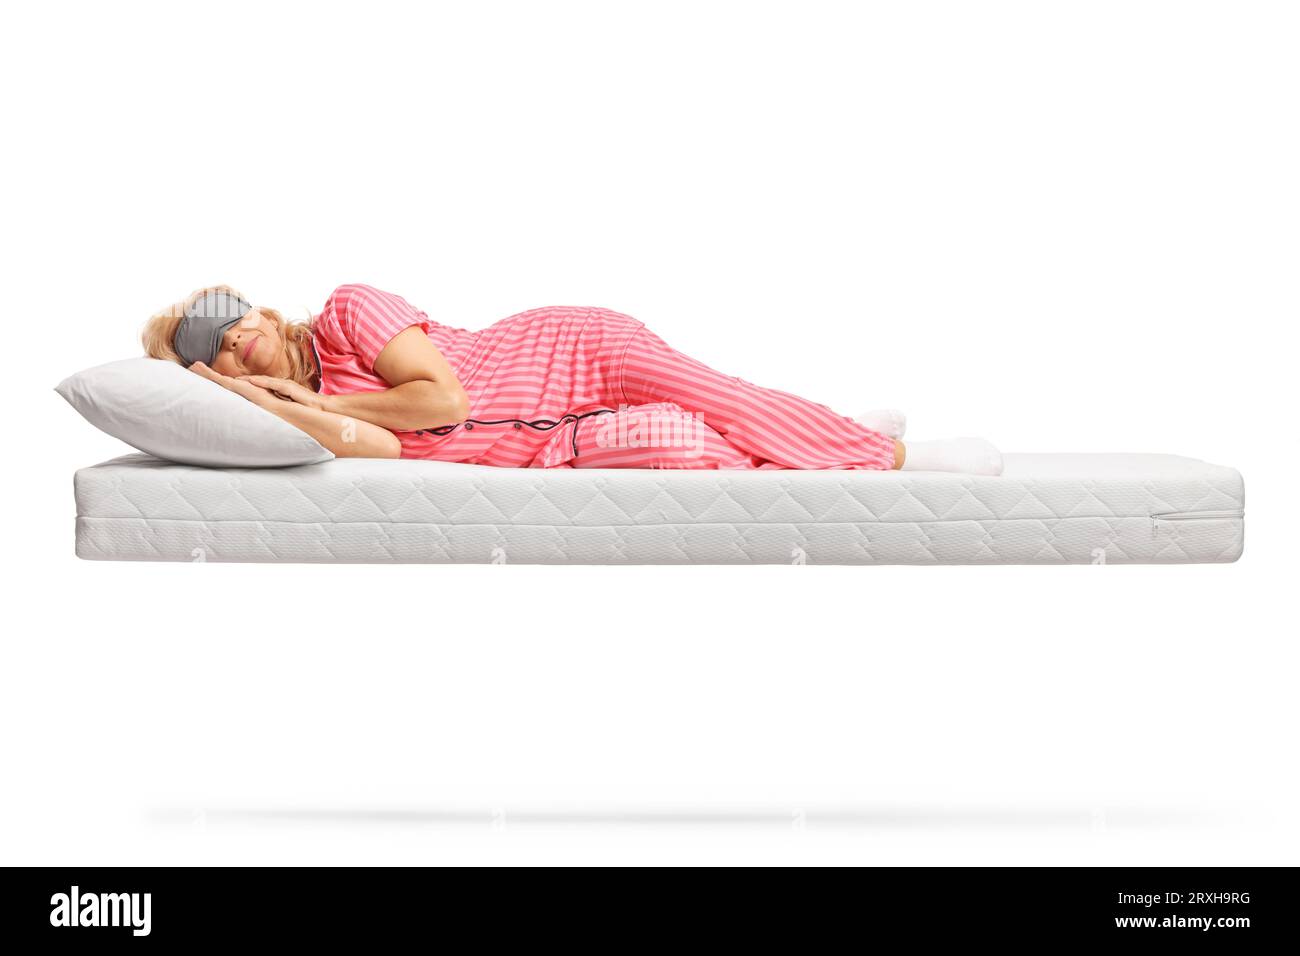 Woman in pajamas sleeping with a mask on a floating mattress isolated on white background Stock Photo